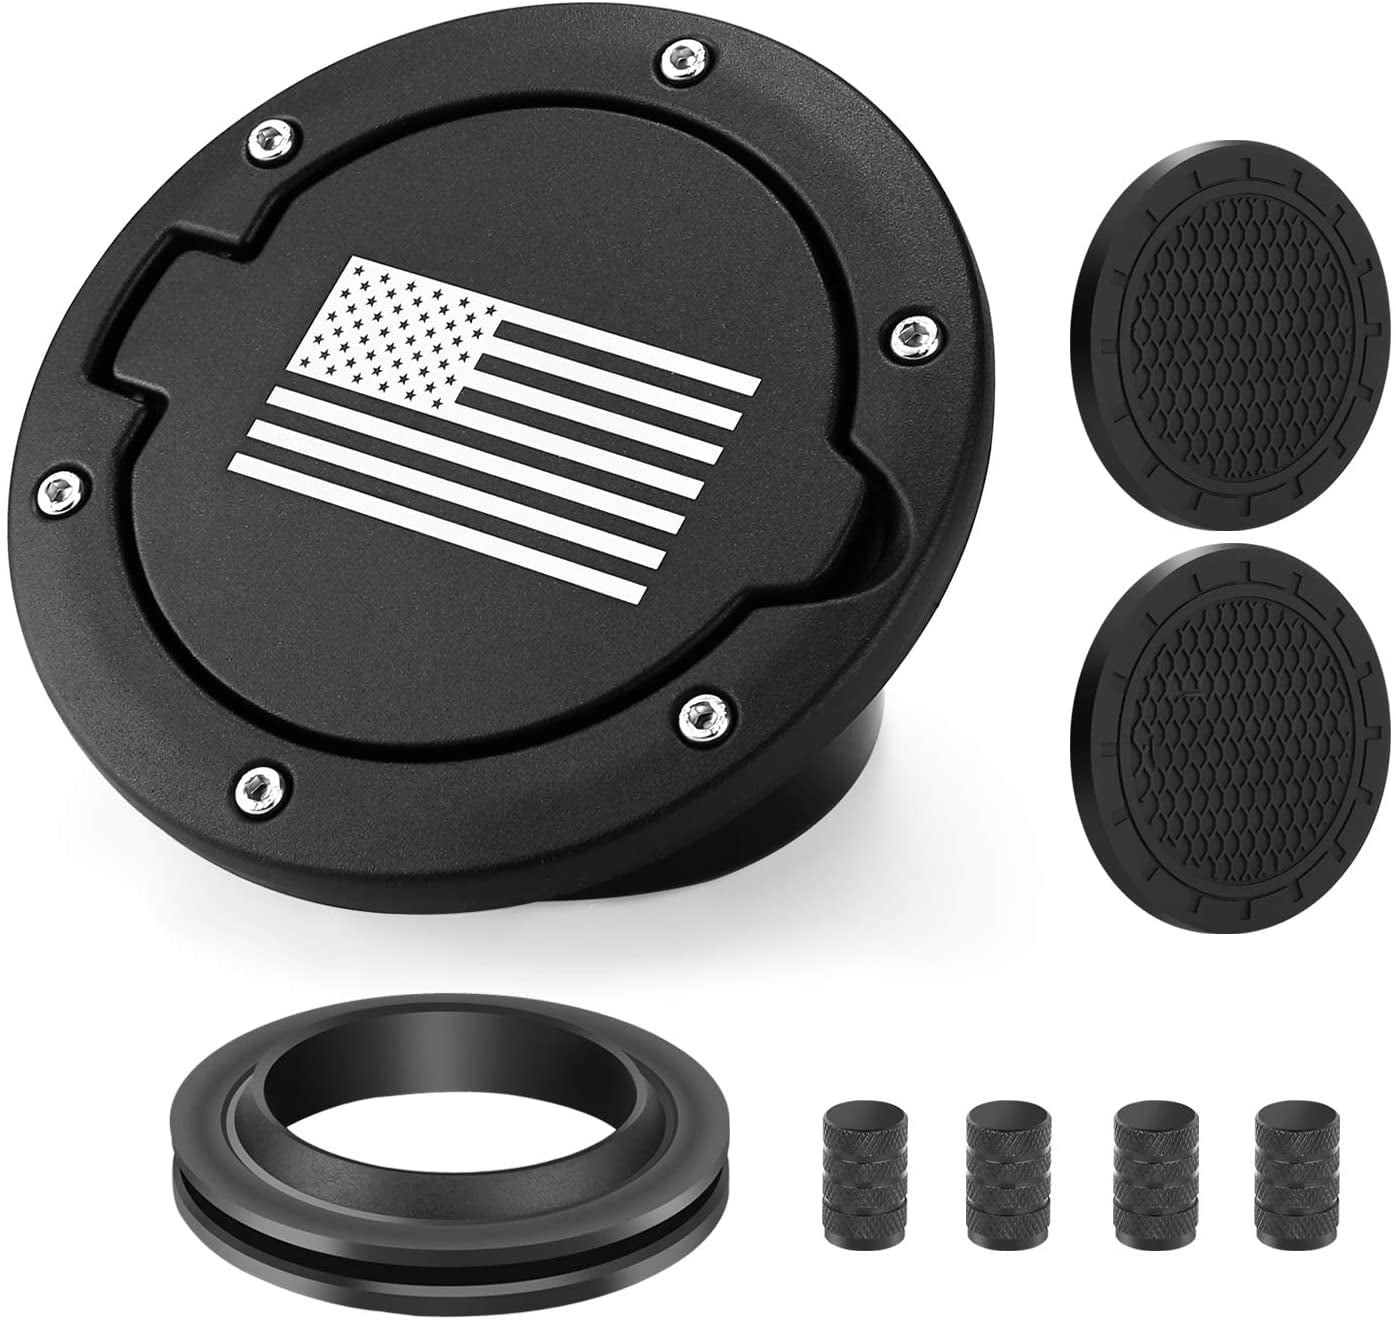 ICARS Black Powder Coated Steel Gas Fuel Tank Gas Cap Cover Accessories for 2007 2008 2009 2010 2011 2012 2013 2014 2015 2016 2017 Jeep Wrangler JK & Unlimited